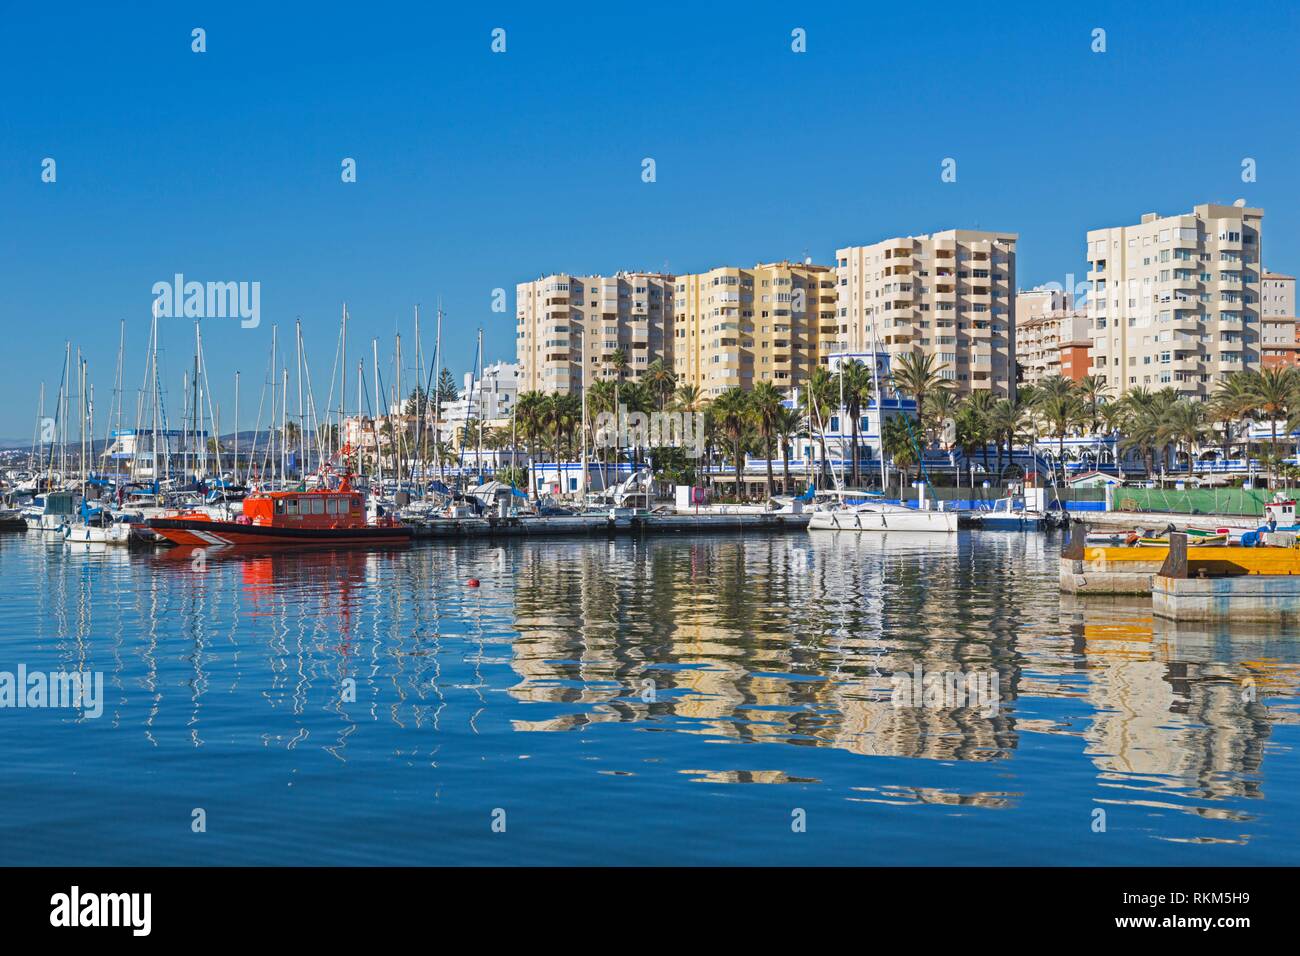 Estepona, Costa del Sol, Malaga Province, Andalusia, southern Spain. Harbour and apartment blocks. Stock Photo